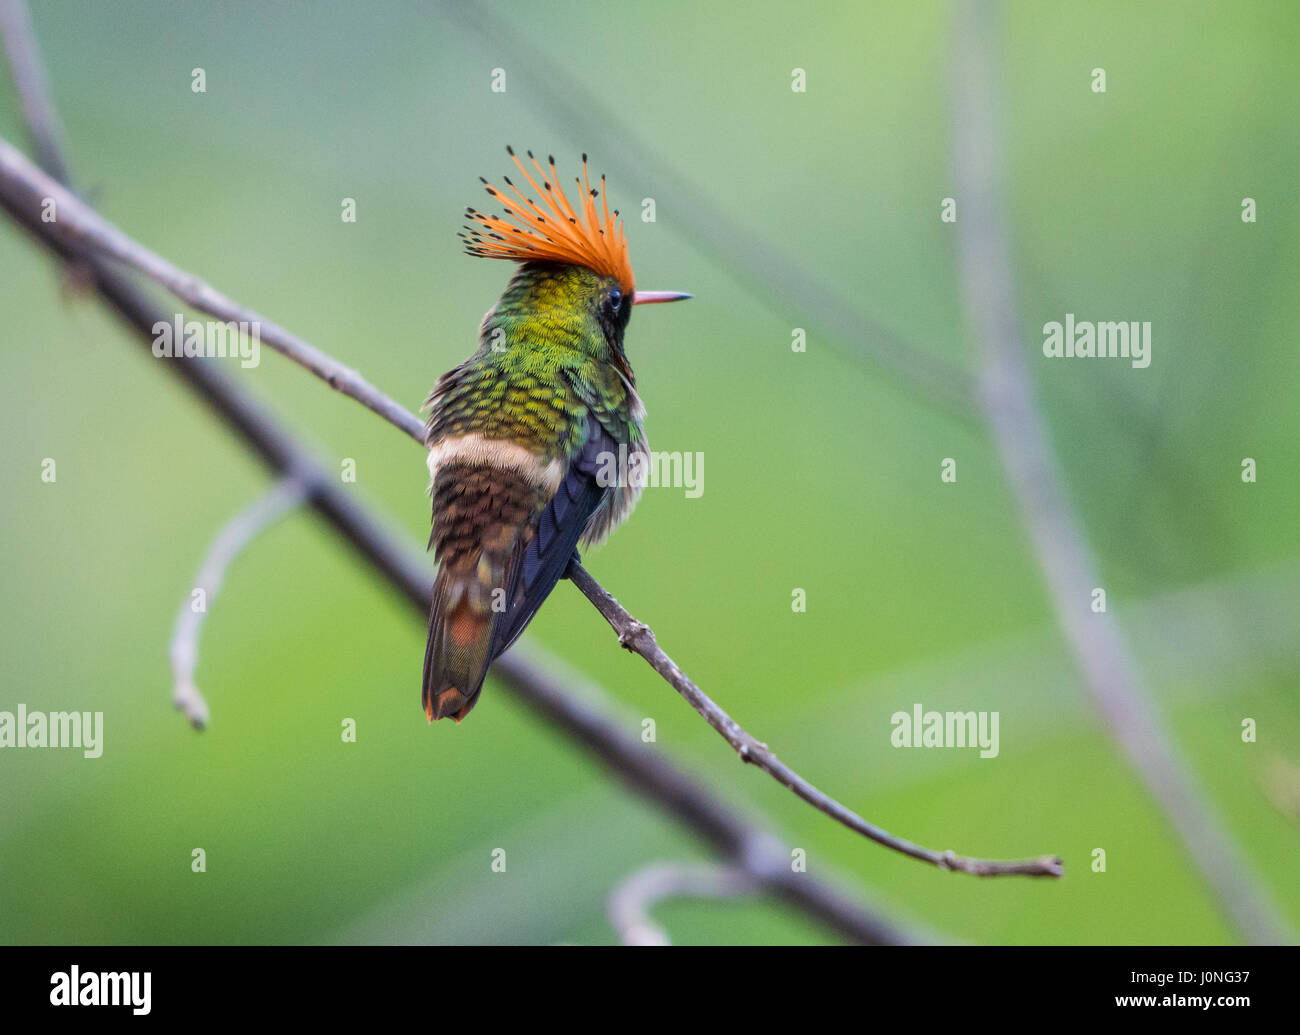 A Rufous-crested Coquette (Lophornis delattrei) with bright orange crest perched on a branch. Peru, South America. Stock Photo